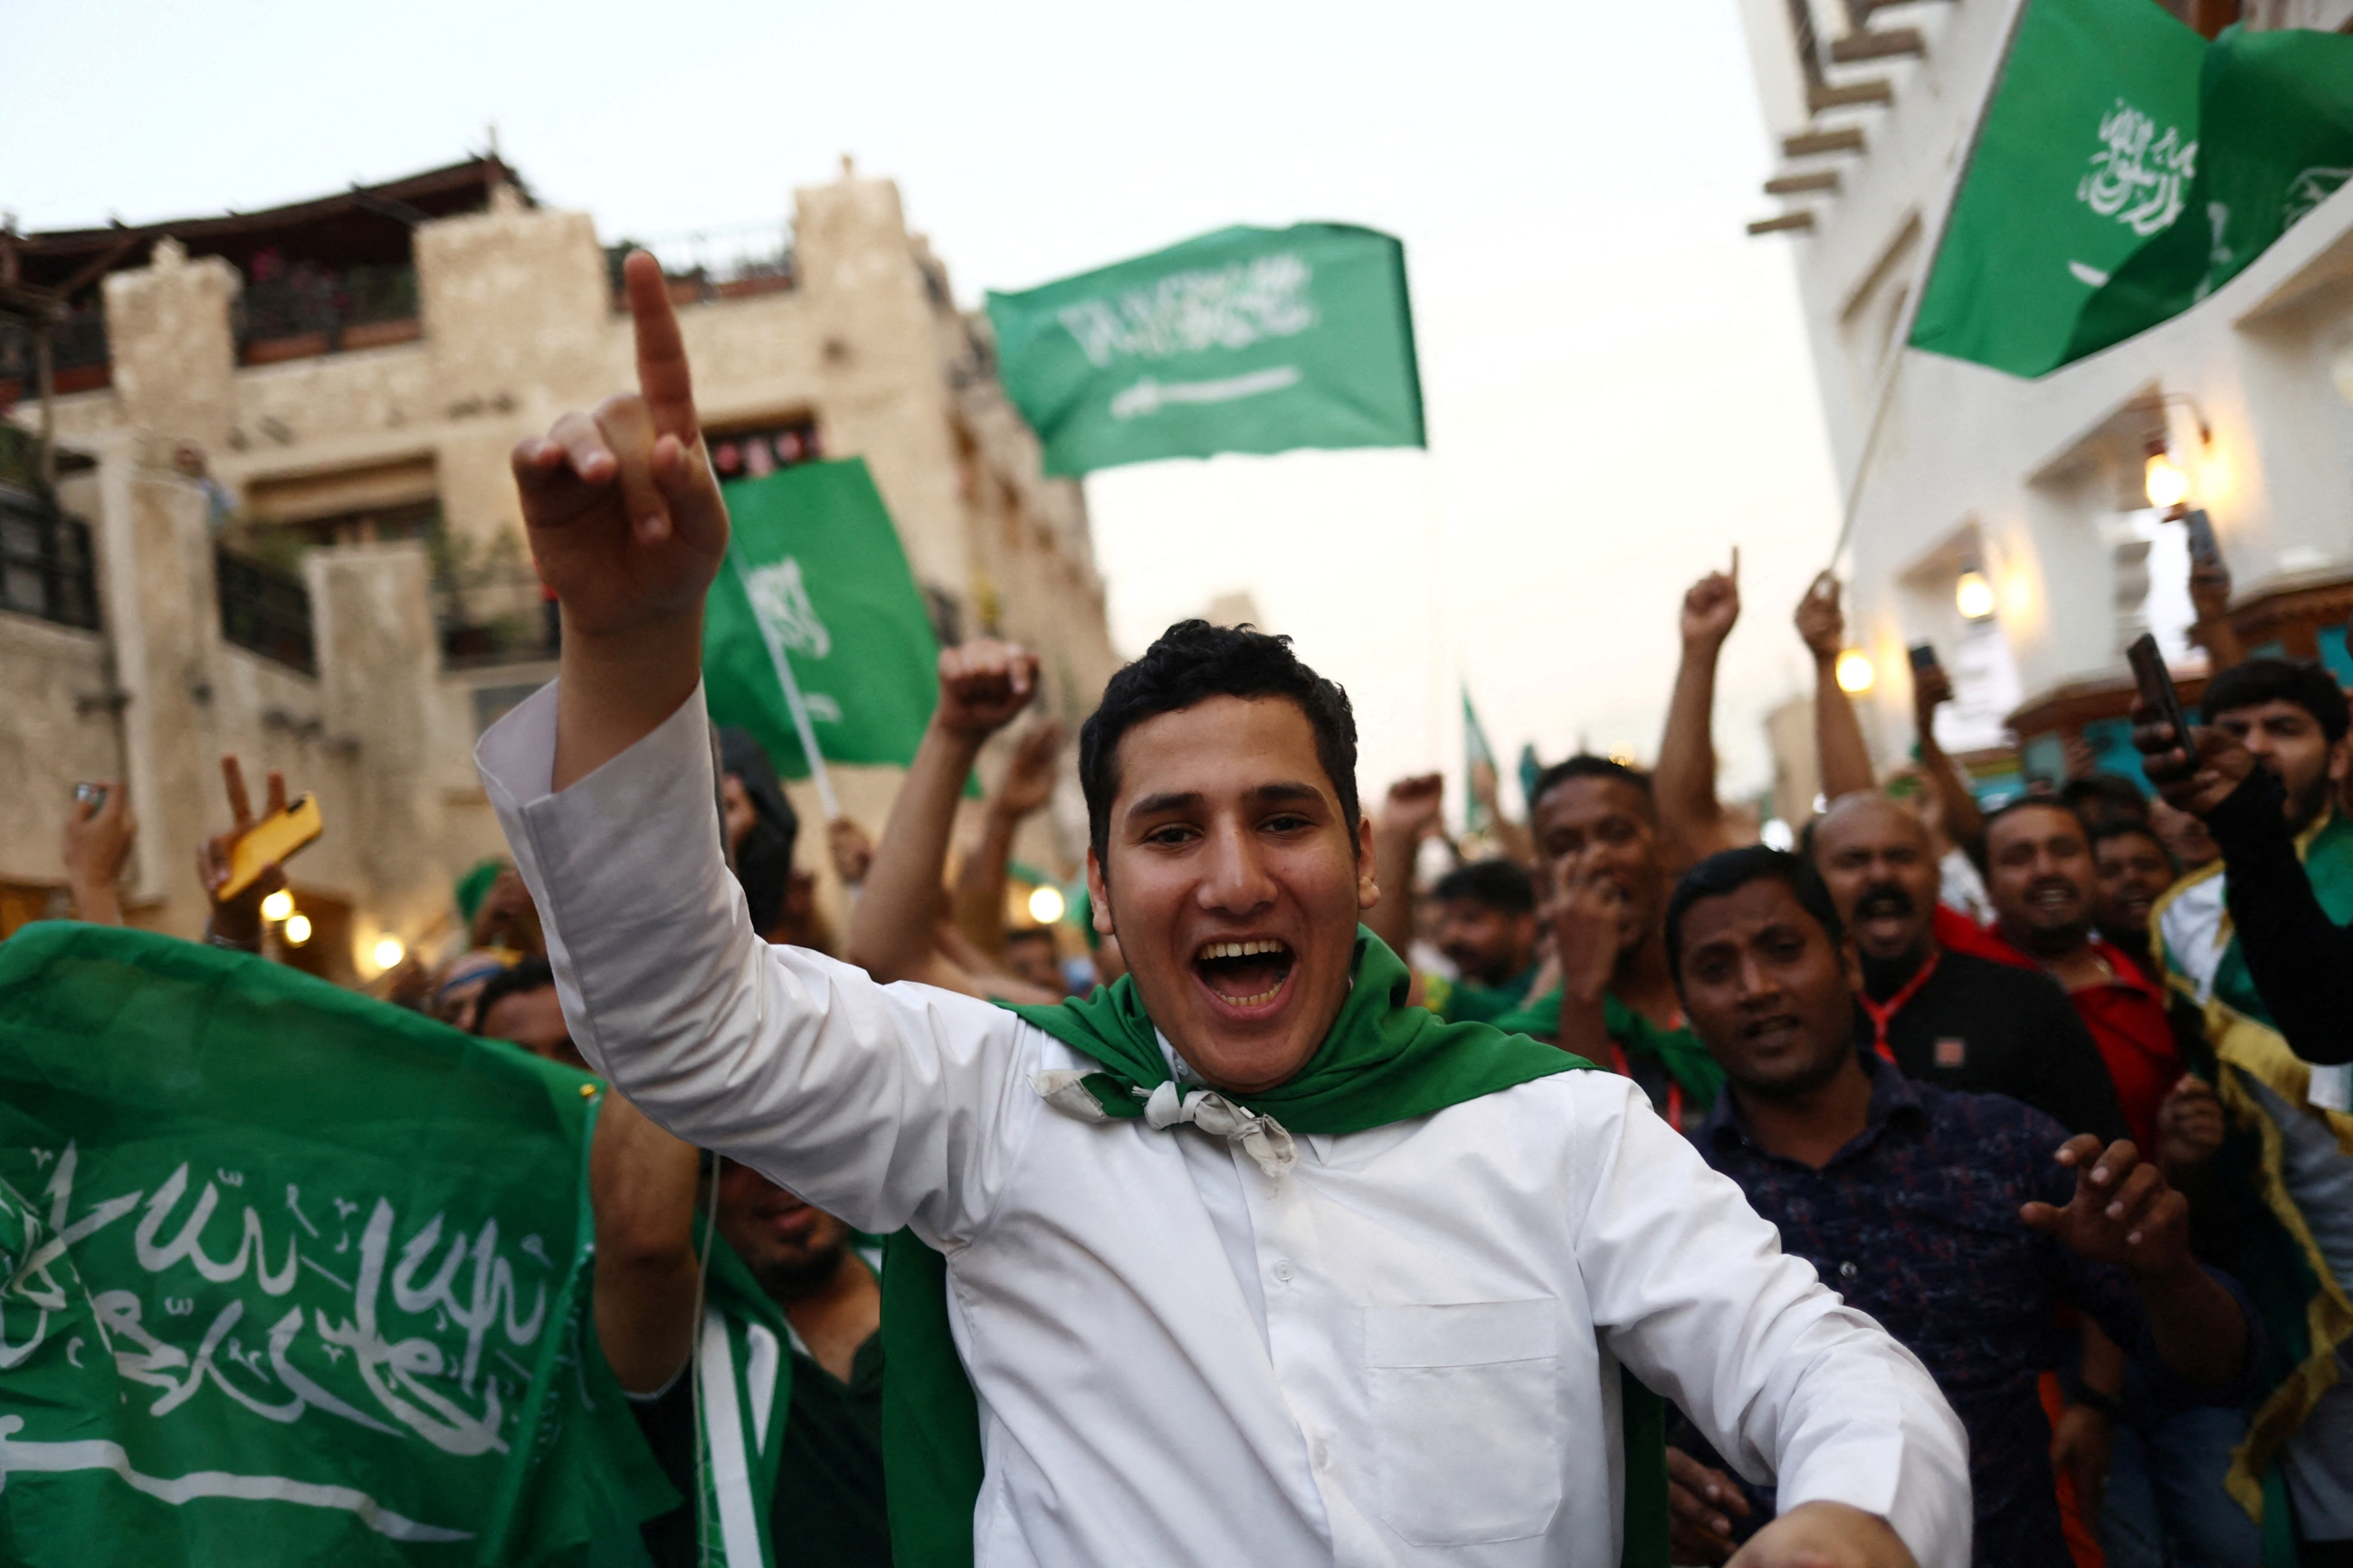 Saudi Arabia fans celebrate in Doha's Souq Waqif after the match between Saudi Arabia and Argentina on 22 November 2022 (Reuters)